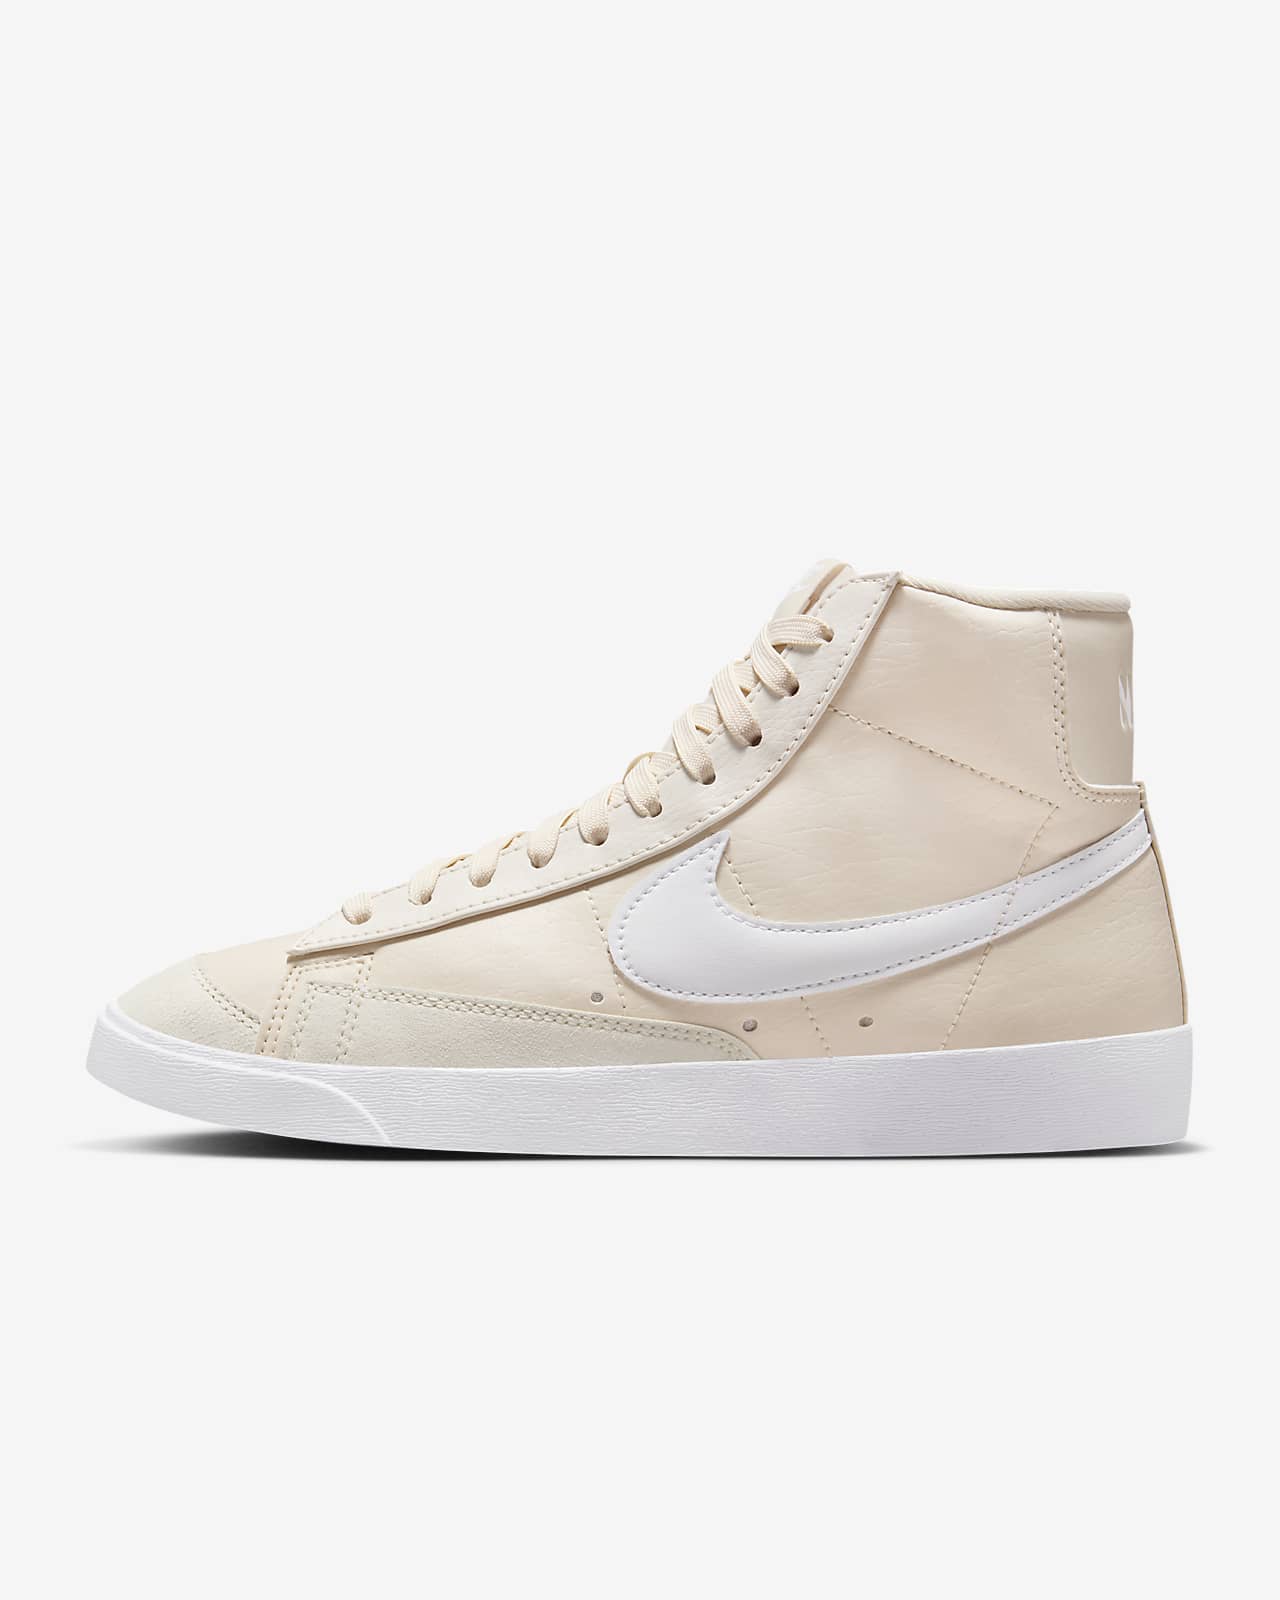 Chaussures Nike Blazer Mid '77 pour femme